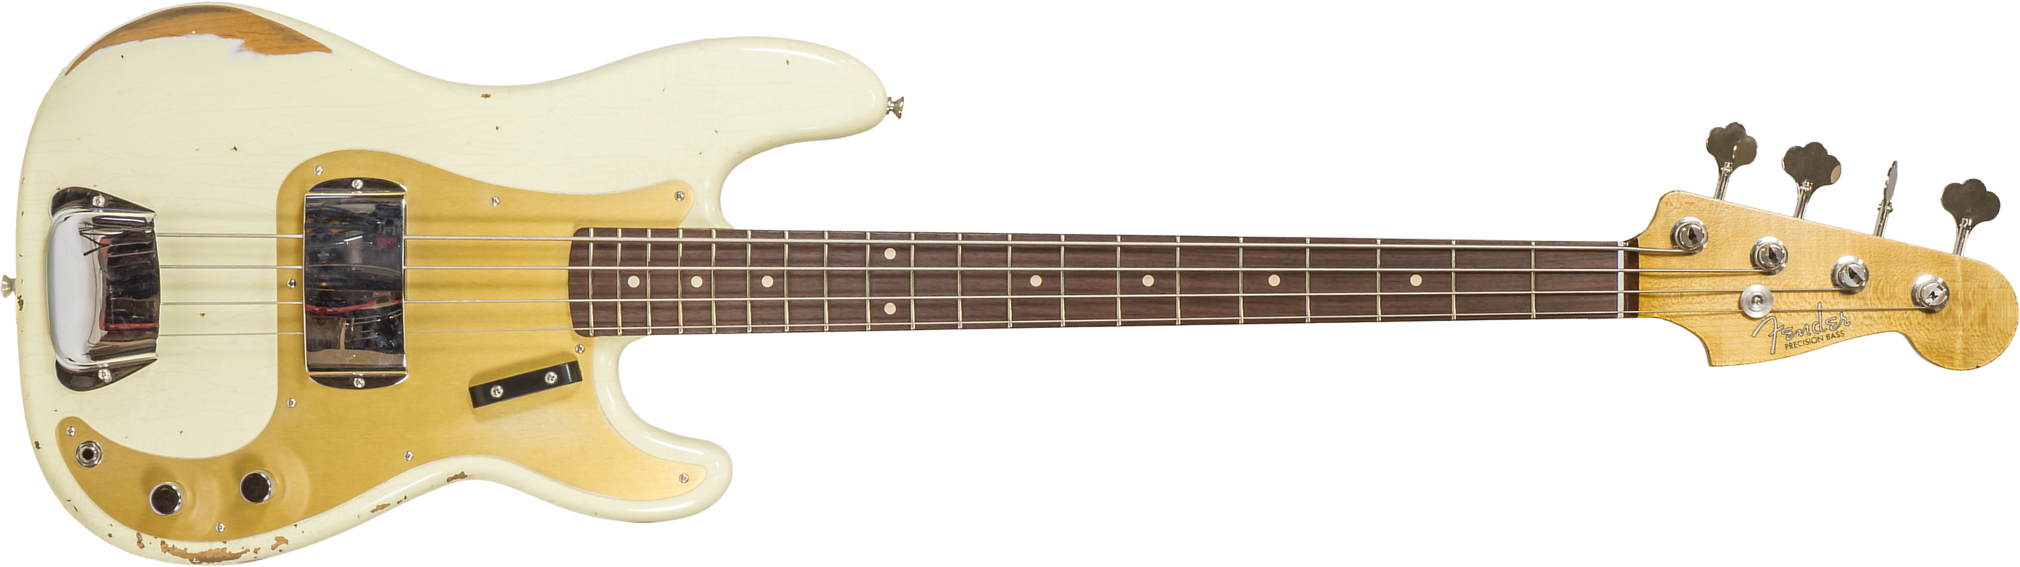 Fender Custom Shop Precision Bass 1960 Rw #r130966 - Closet Classic Vintage White - Solid body electric bass - Main picture